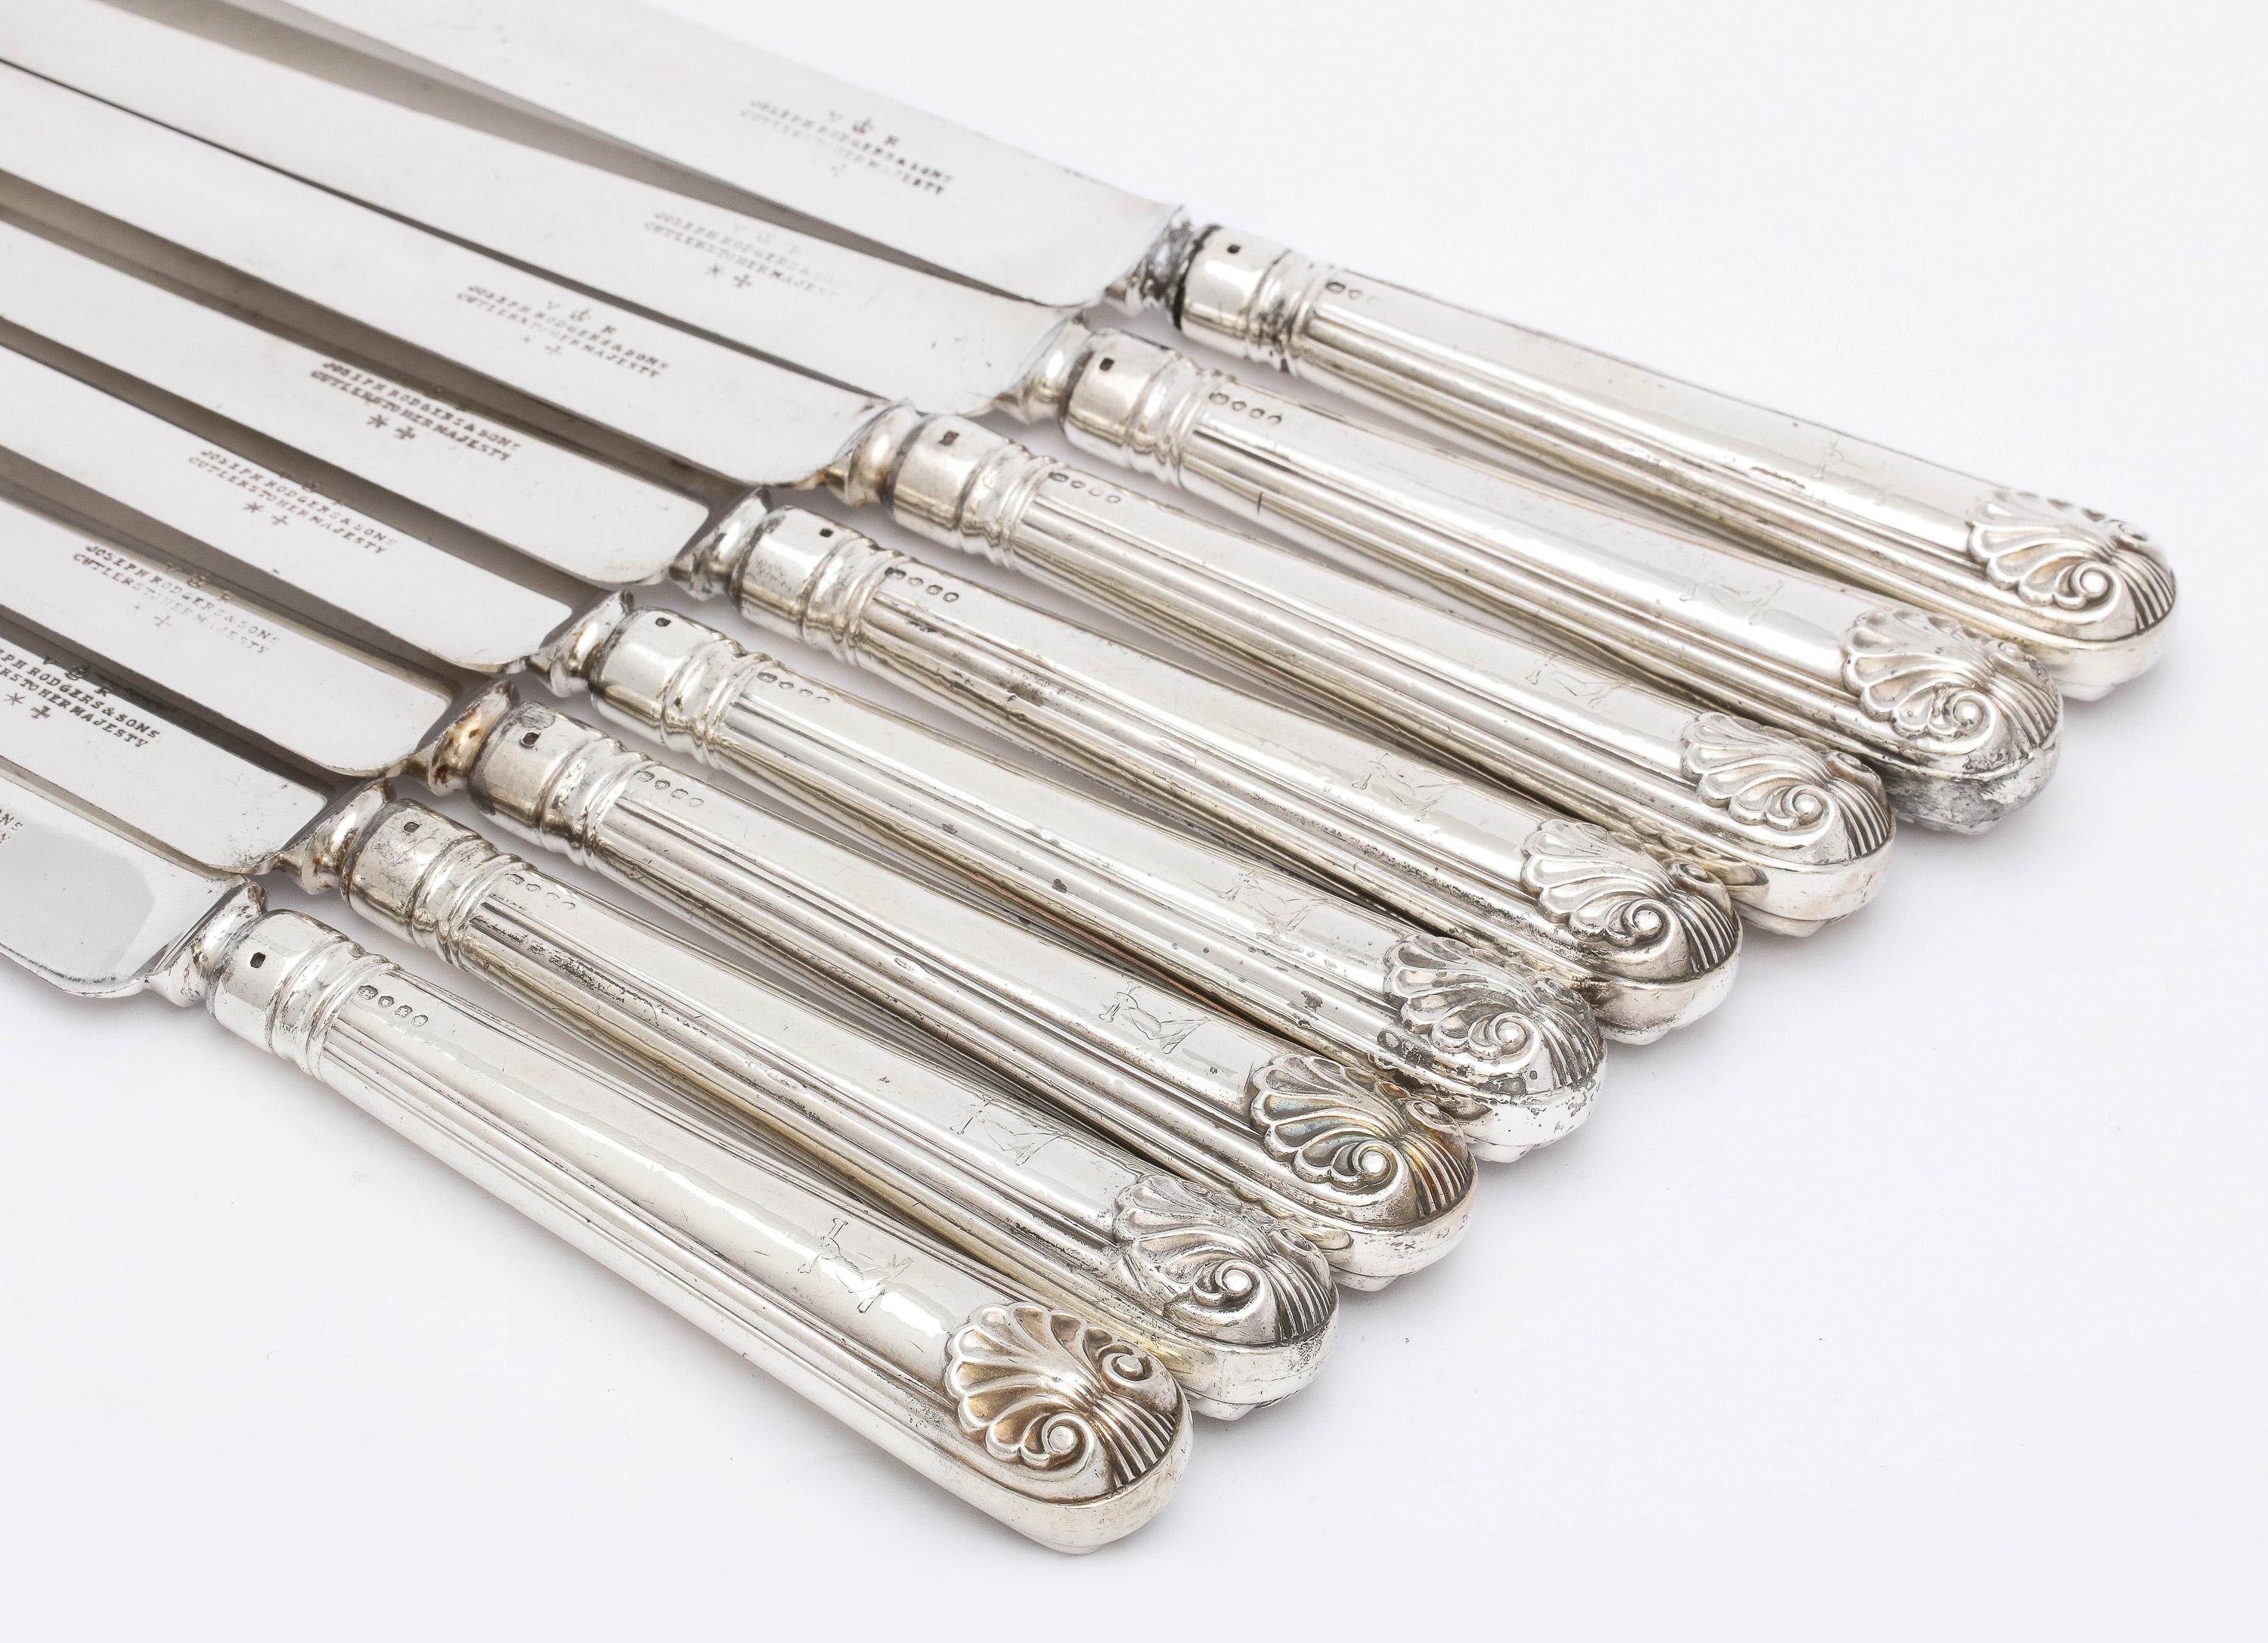 Silver Plate Victorian Period Set of 8 Sterling Silver-Handled Shell Pattern Knives